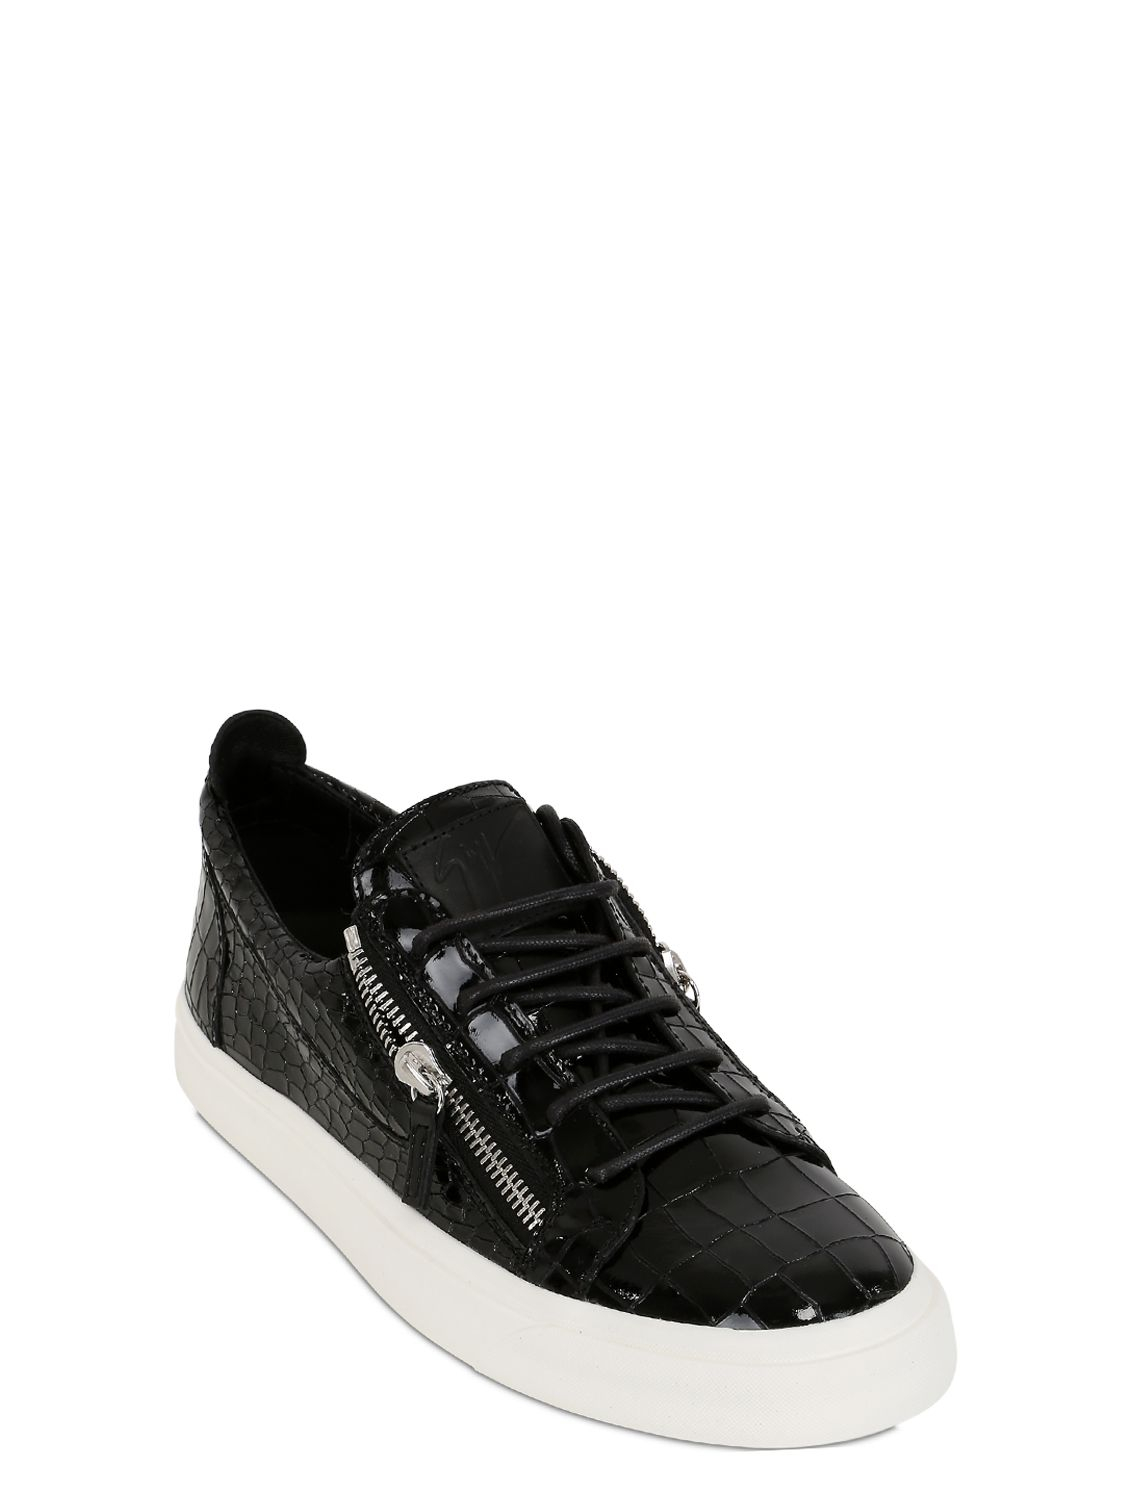 Giuseppe Zanotti Homme Croc Embossed Patent Leather Sneakers in Black ...